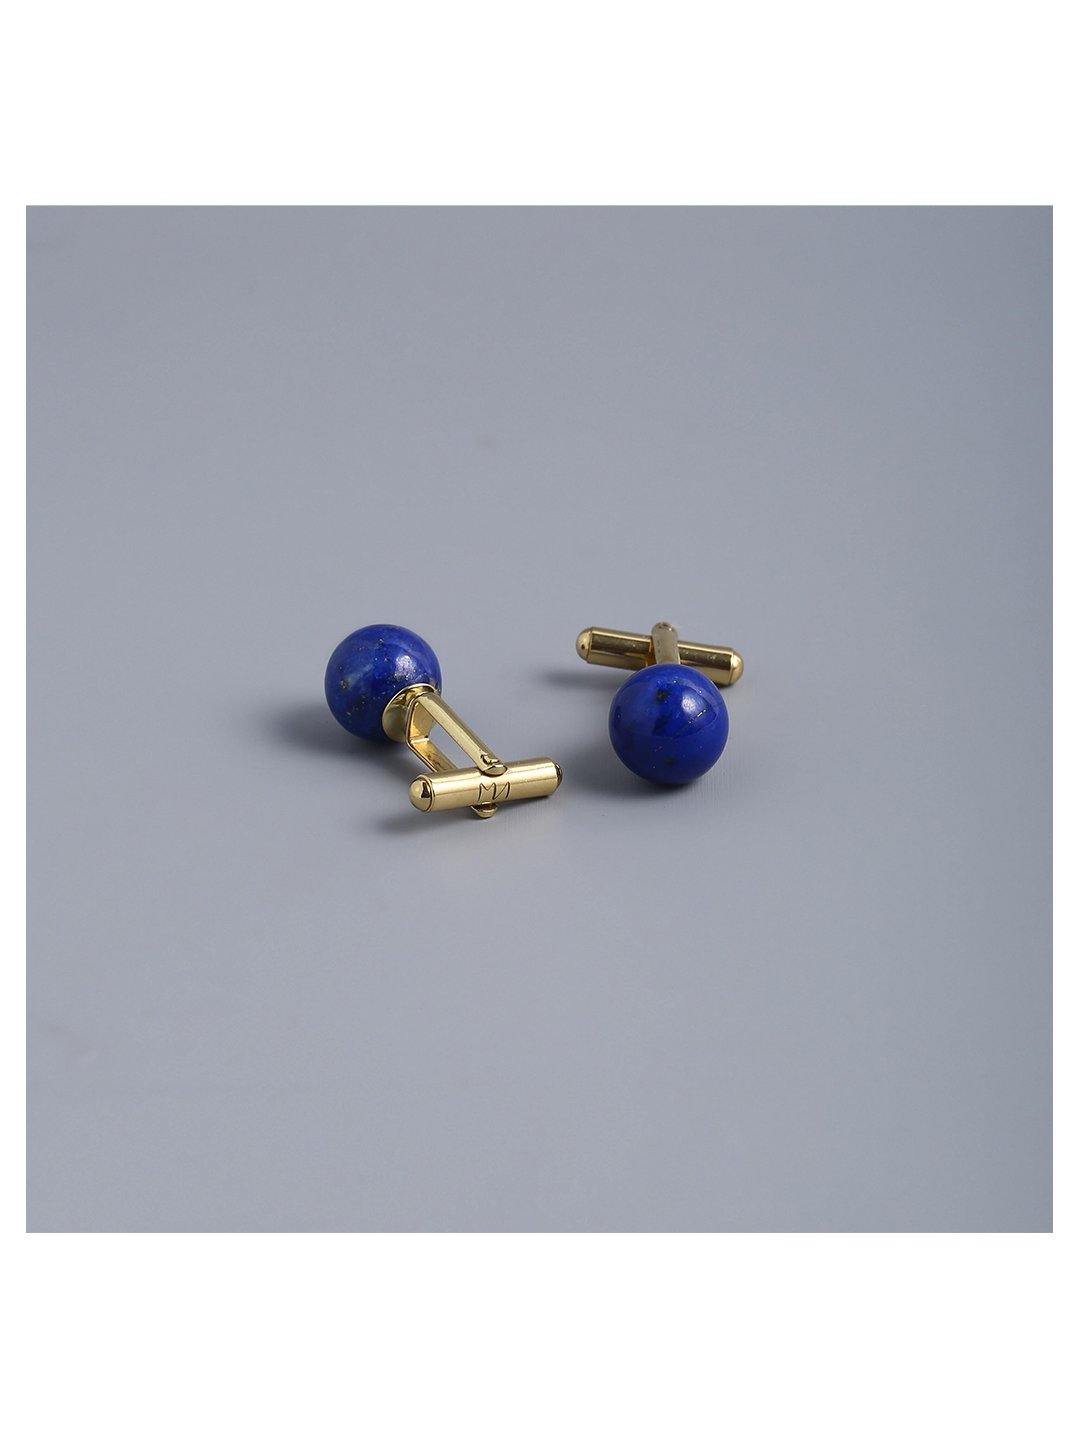 Lapis Cufflinks For Him -View 1